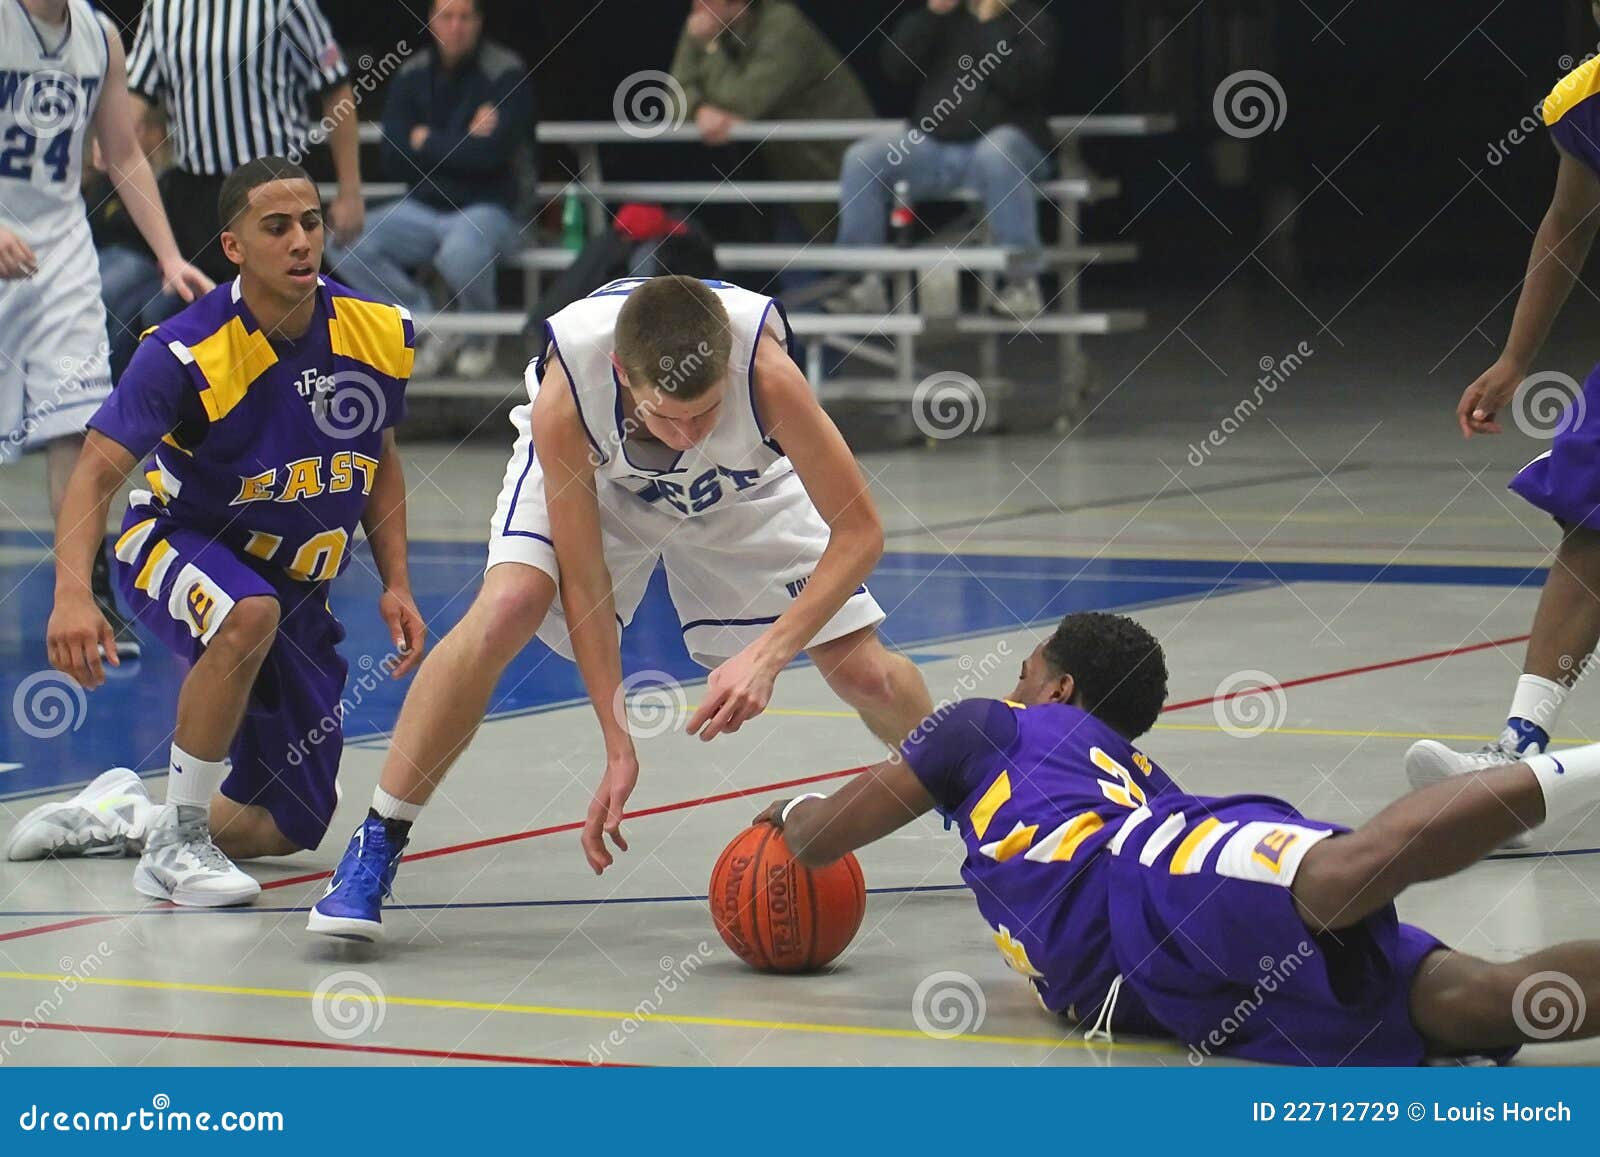 Basketball Action editorial stock image. Image of league - 22712729